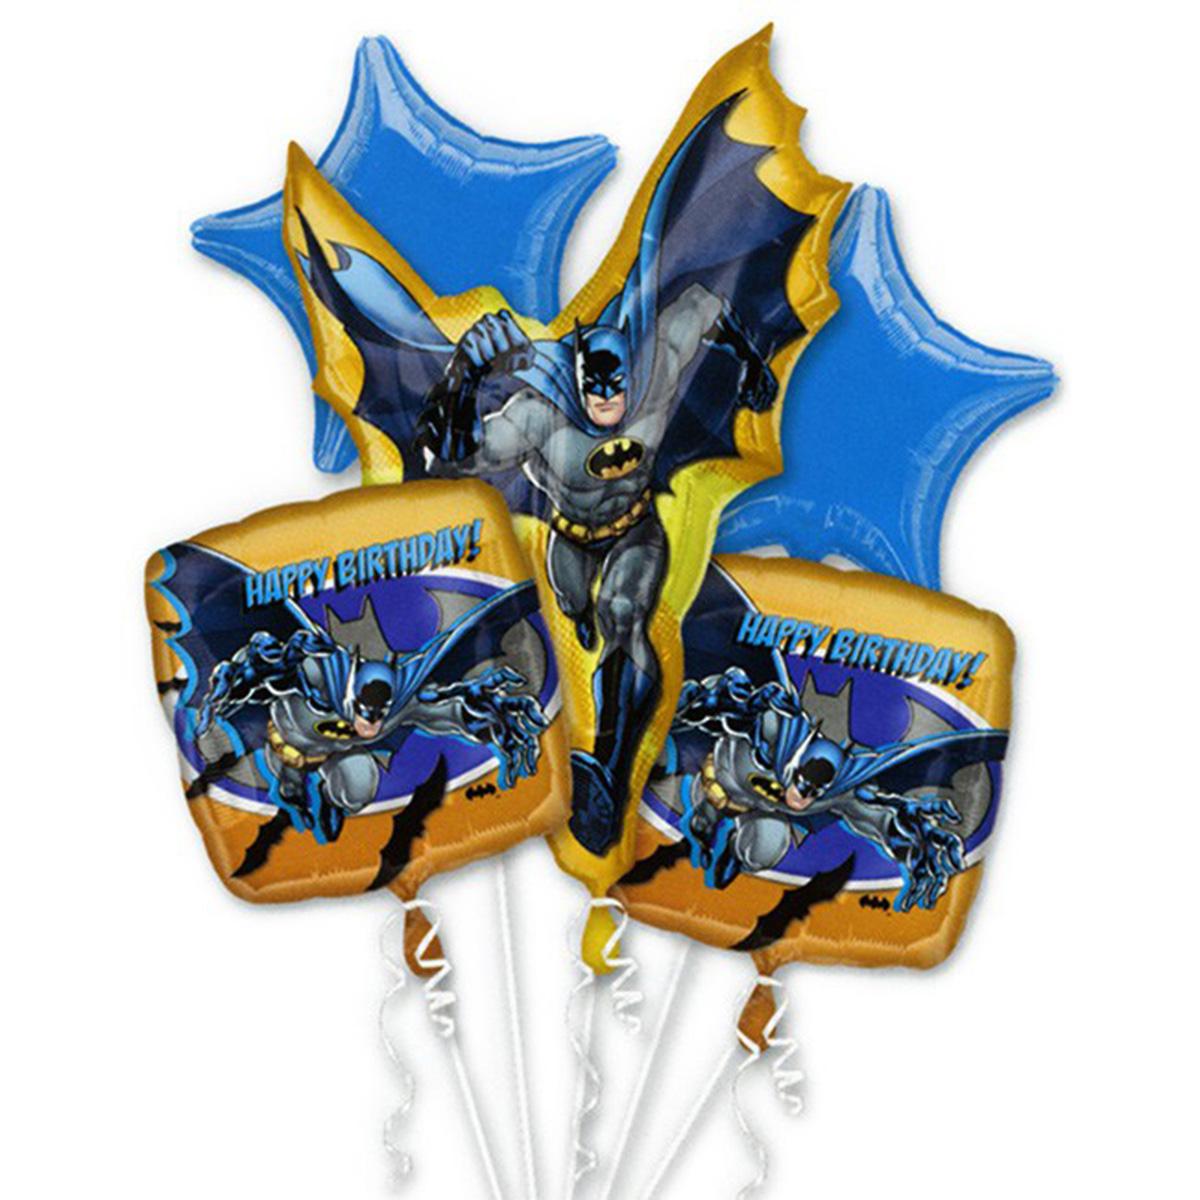 Batman Birthday Bouquet 5ct Balloons & Streamers - Party Centre